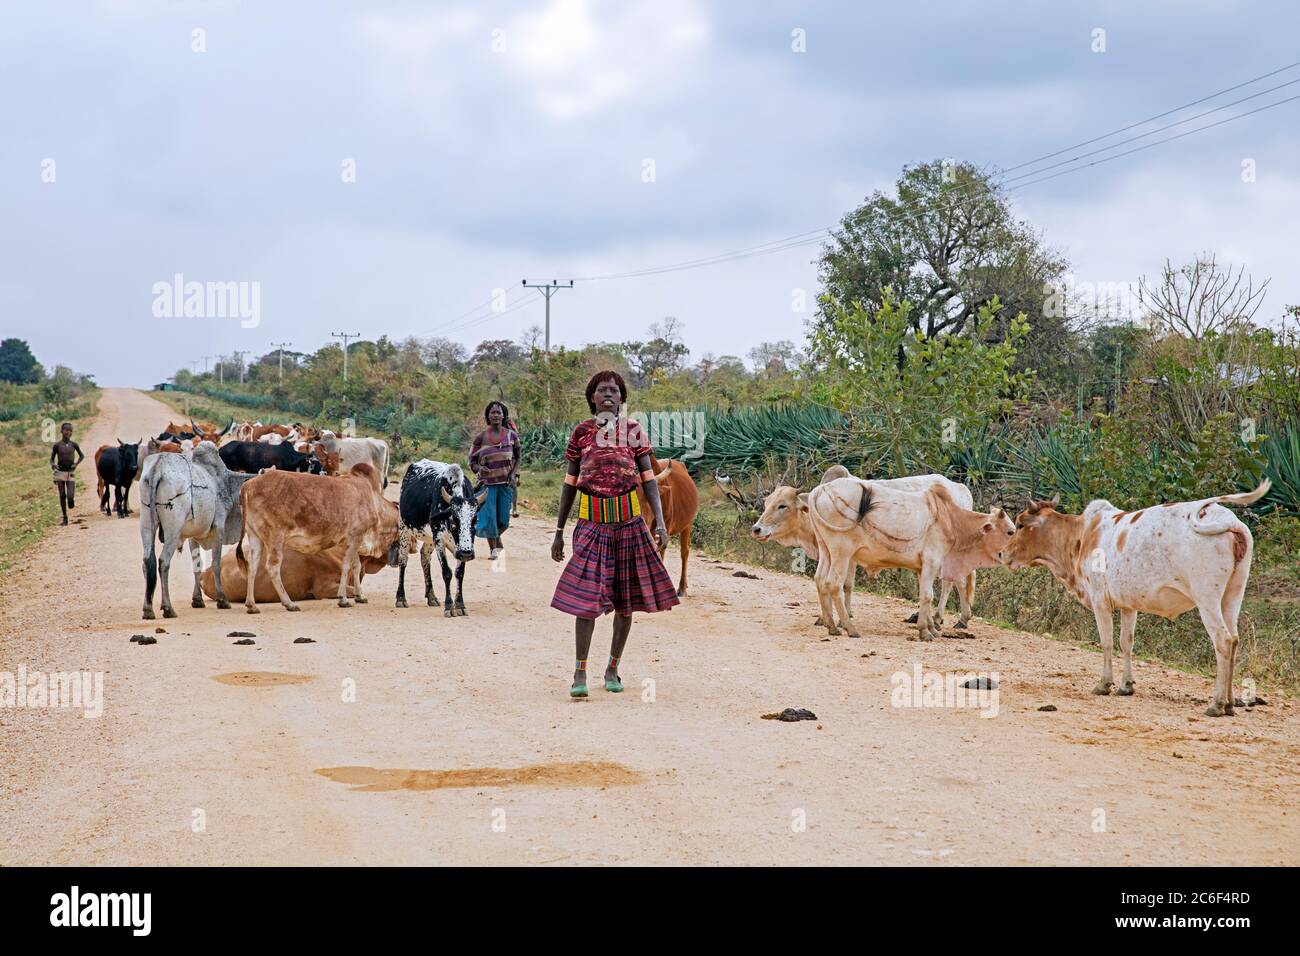 Two black women of the Banna / Banya tribe herding cattle along dirt road in the Lower Omo Valley, Debub Omo Zone, Southern Ethiopia, Africa Stock Photo